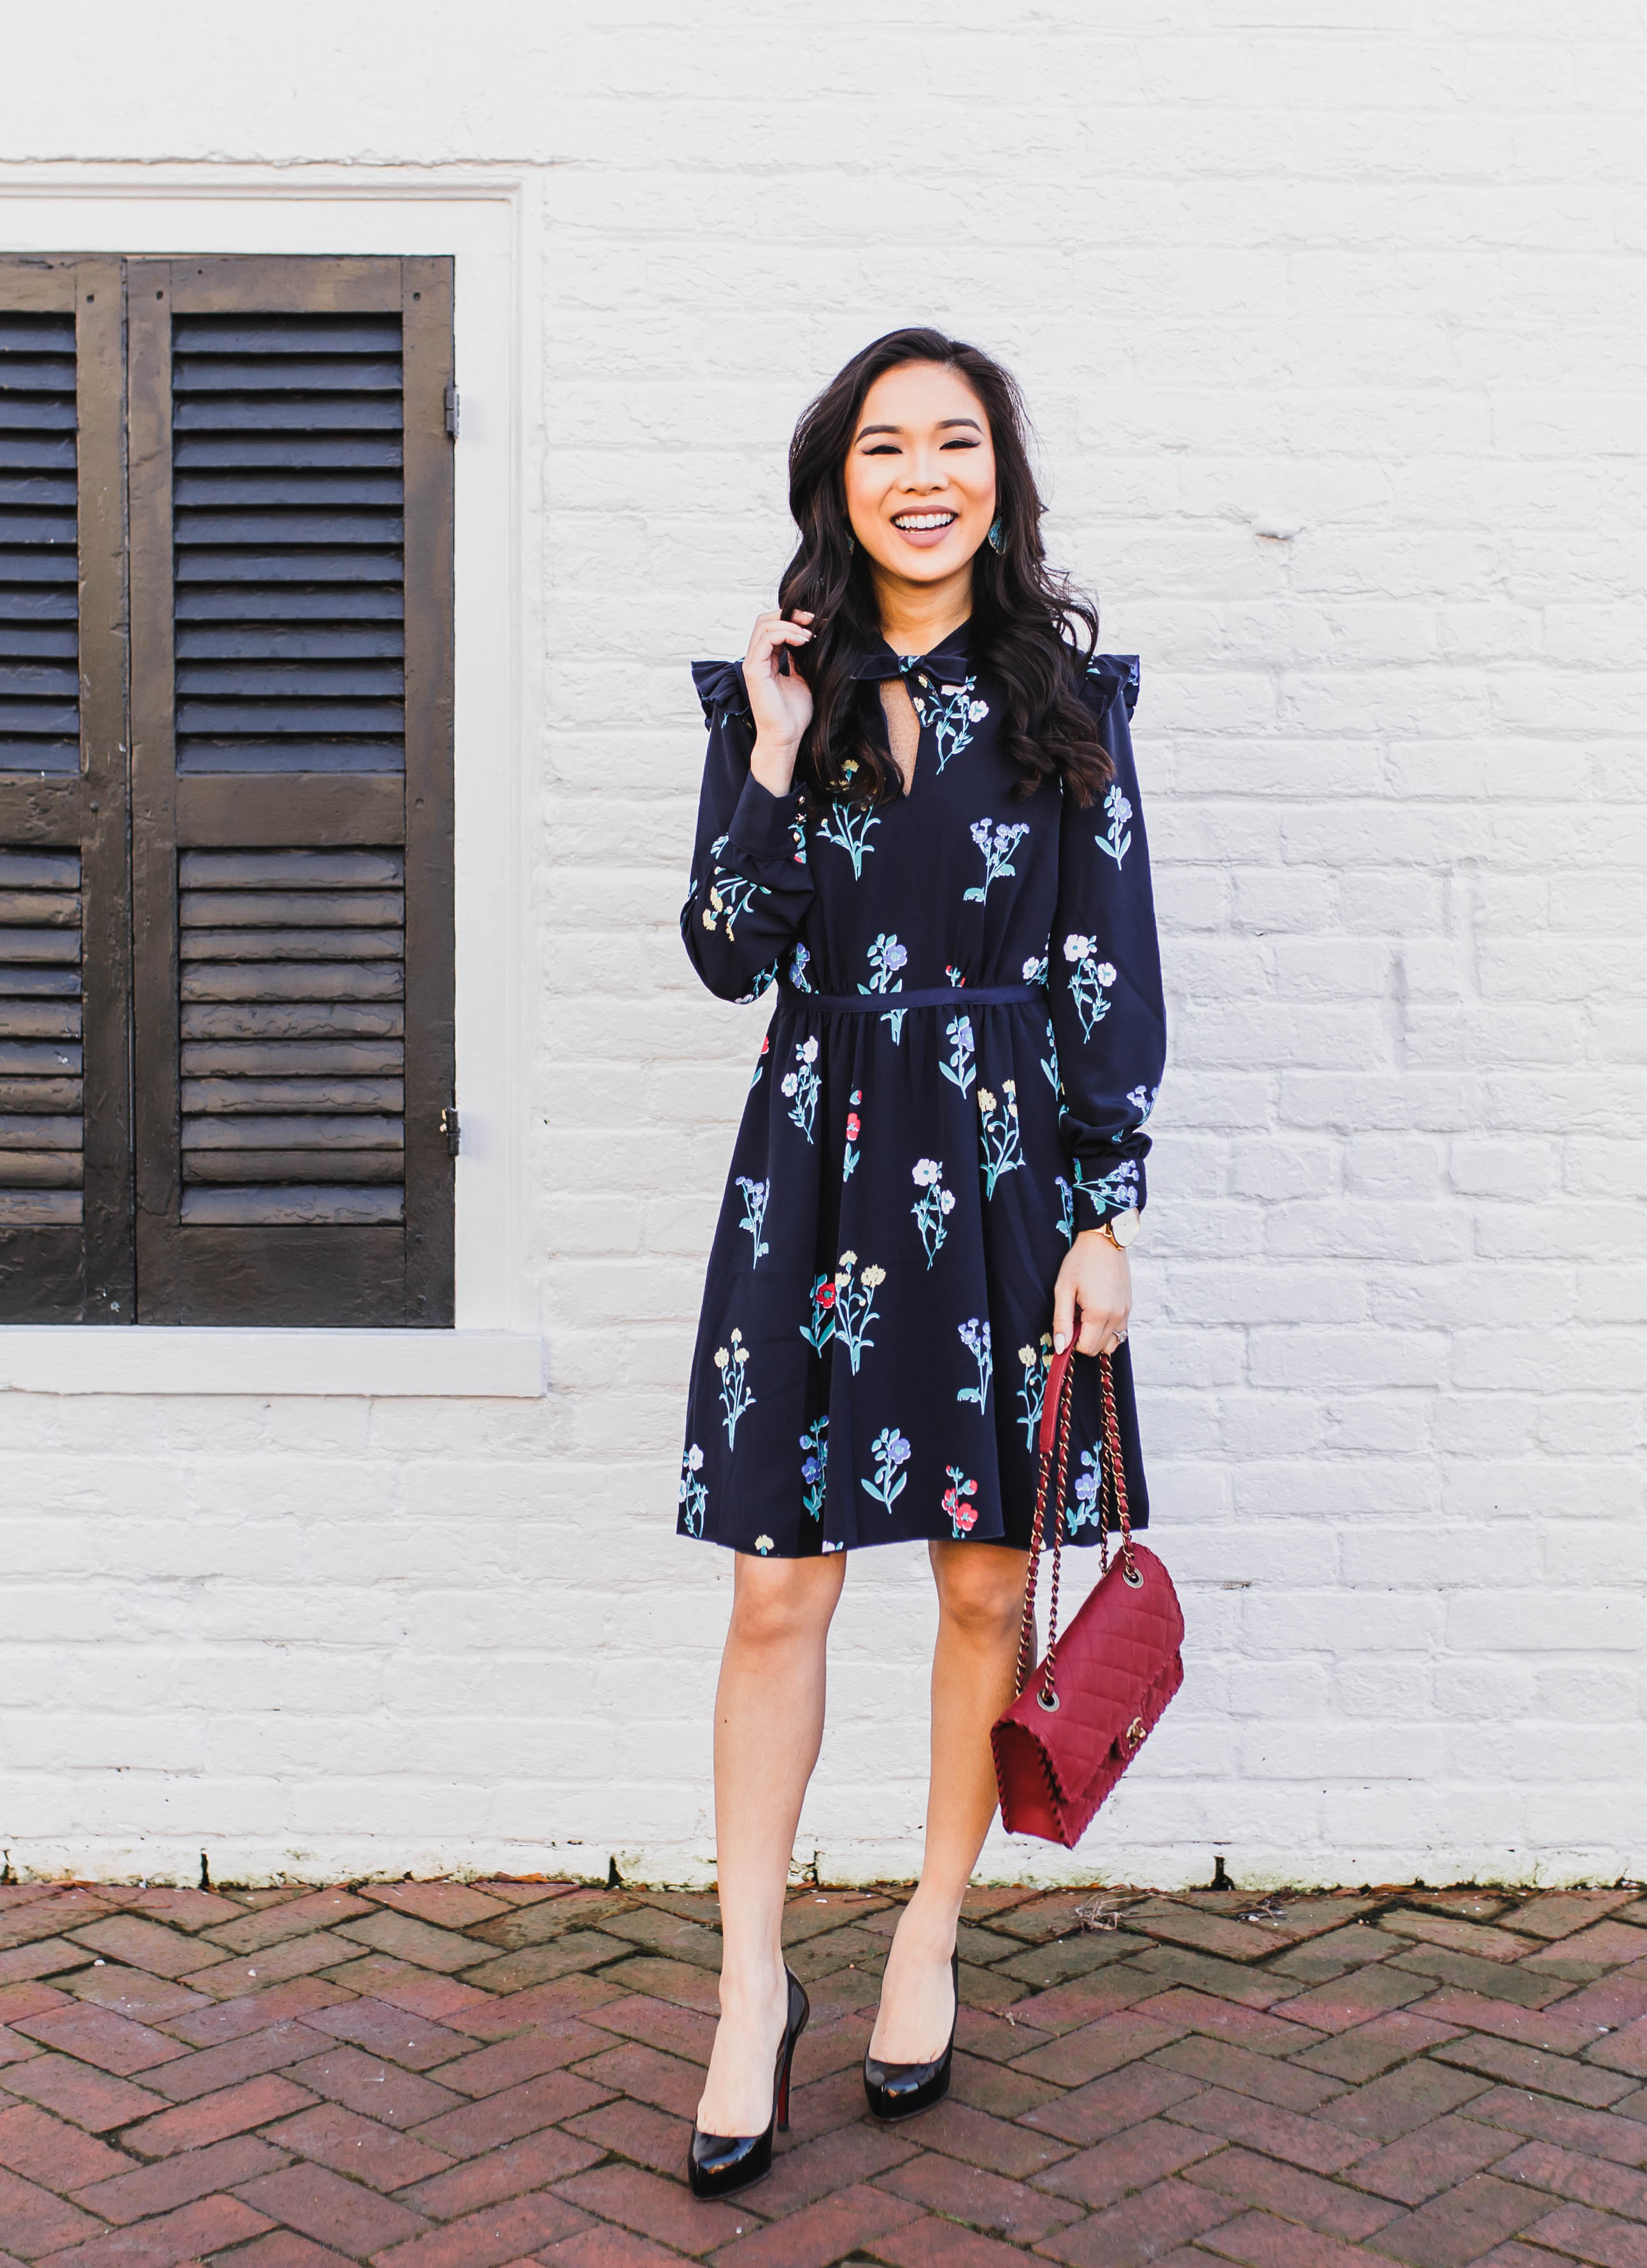 Friday Feels :: Tisdale Floral Dress for Early Spring - Color & Chic